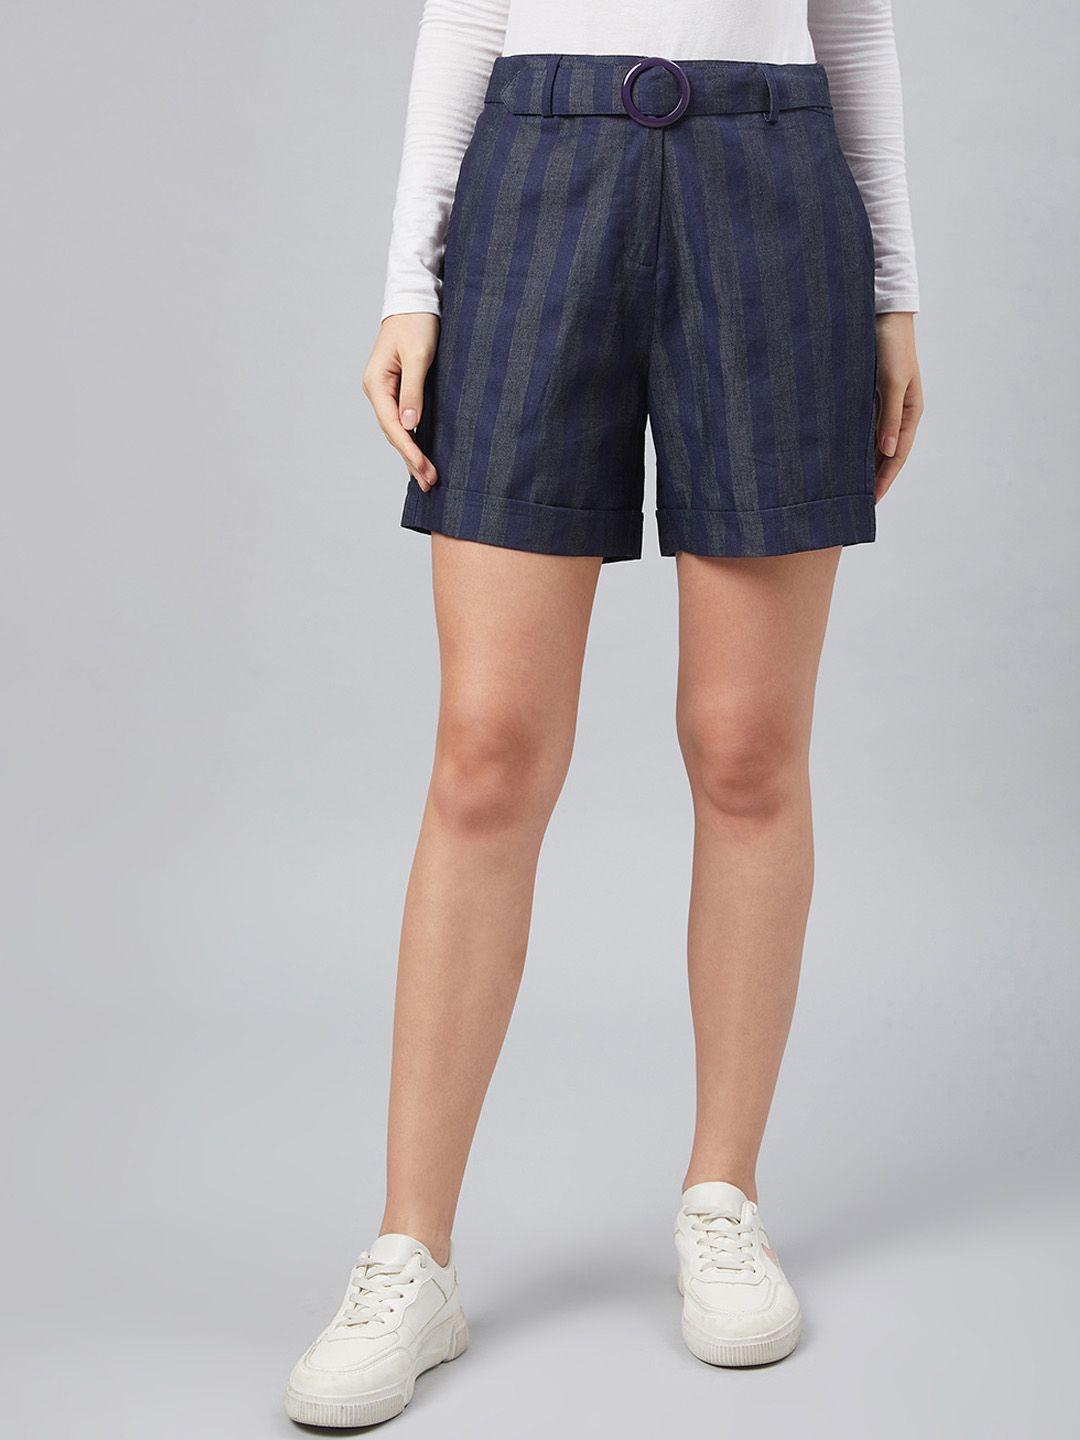 Marie Claire Women Navy Blue Striped Regular Fit Shorts